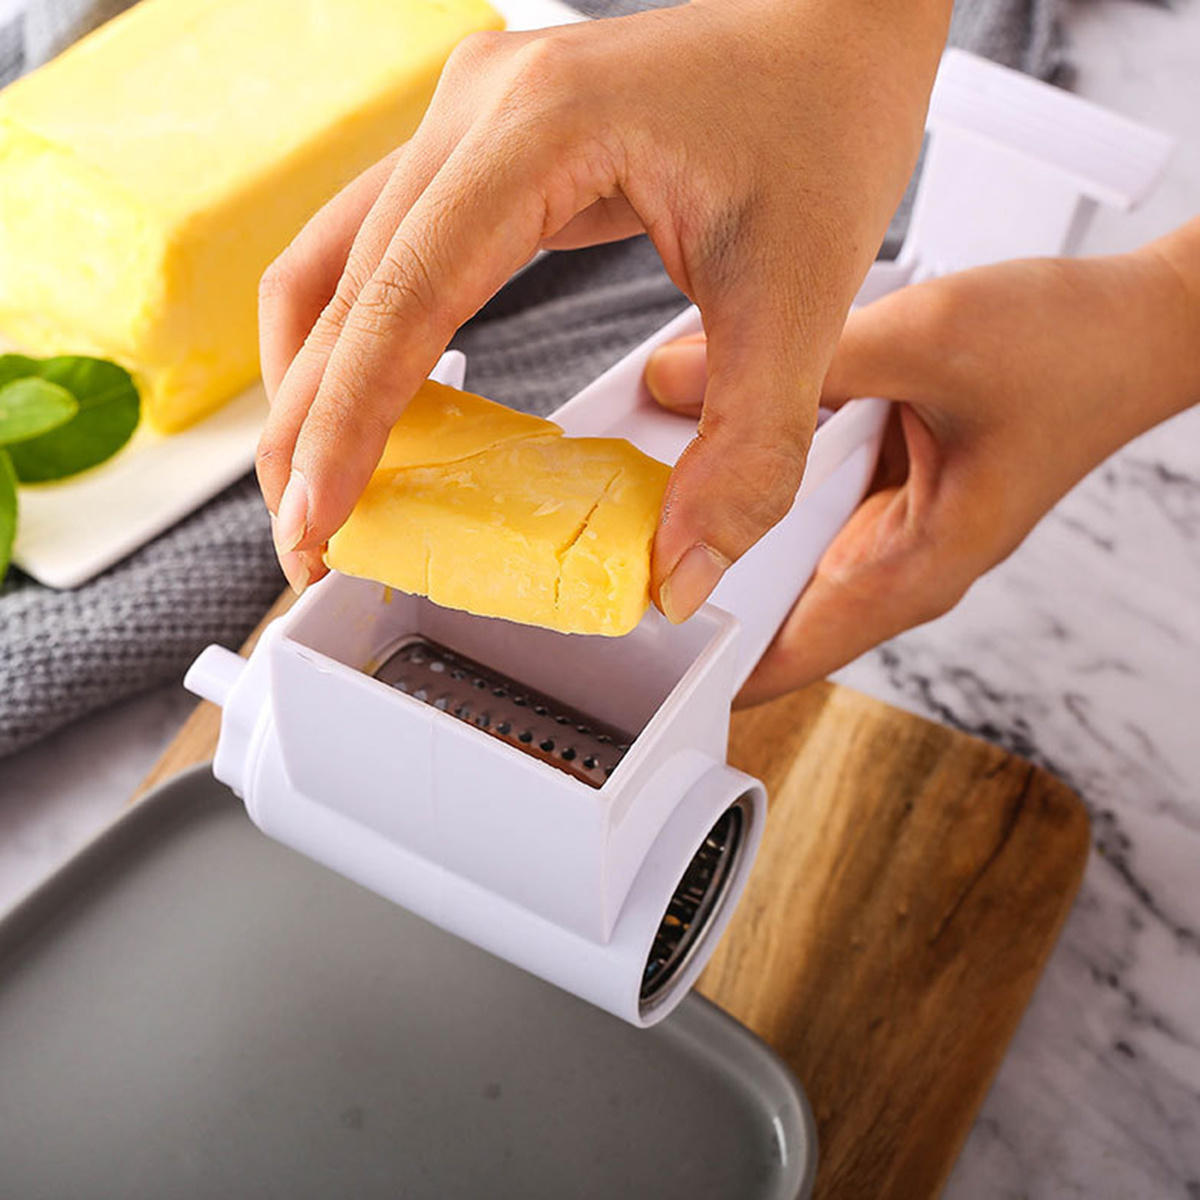 Our rotary cheese grater can slice vegetables easily and quickly, whic